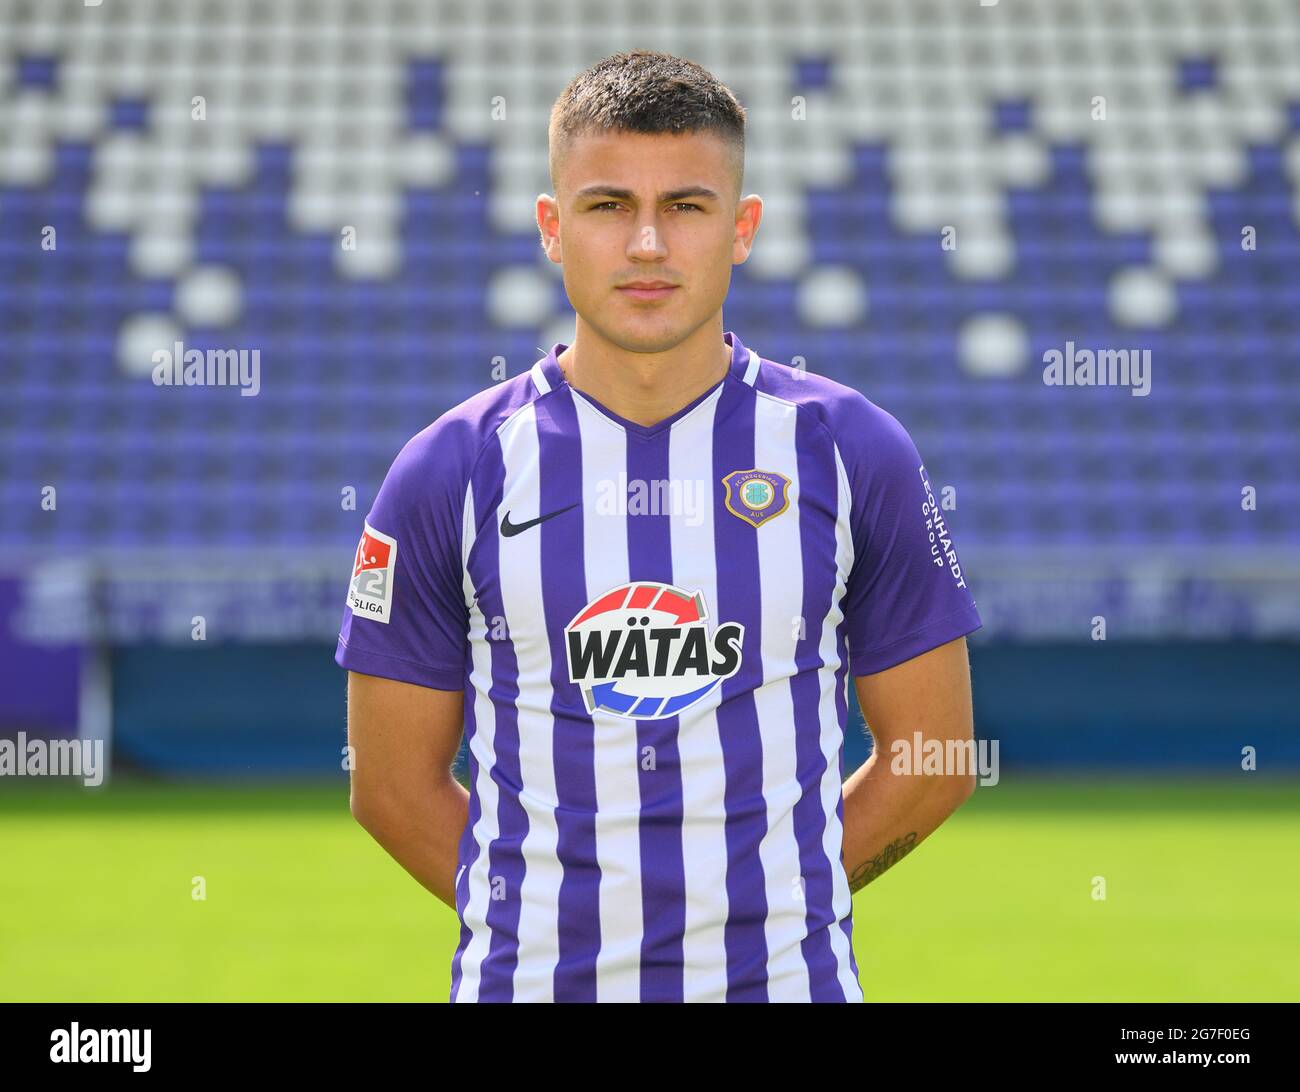 Aue, Germany. 13th July, 2021. Football: 2. league, media day, season 2021/2021, FC Erzgebirge Aue, at Erzgebirgsstadion. Player Antonio Jonjic. Credit: Robert Michael/dpa-Zentralbild/dpa - IMPORTANT NOTE: In accordance with the regulations of the DFL Deutsche Fußball Liga and/or the DFB Deutscher Fußball-Bund, it is prohibited to use or have used photographs taken in the stadium and/or of the match in the form of sequence pictures and/or video-like photo series./dpa/Alamy Live News Stock Photo